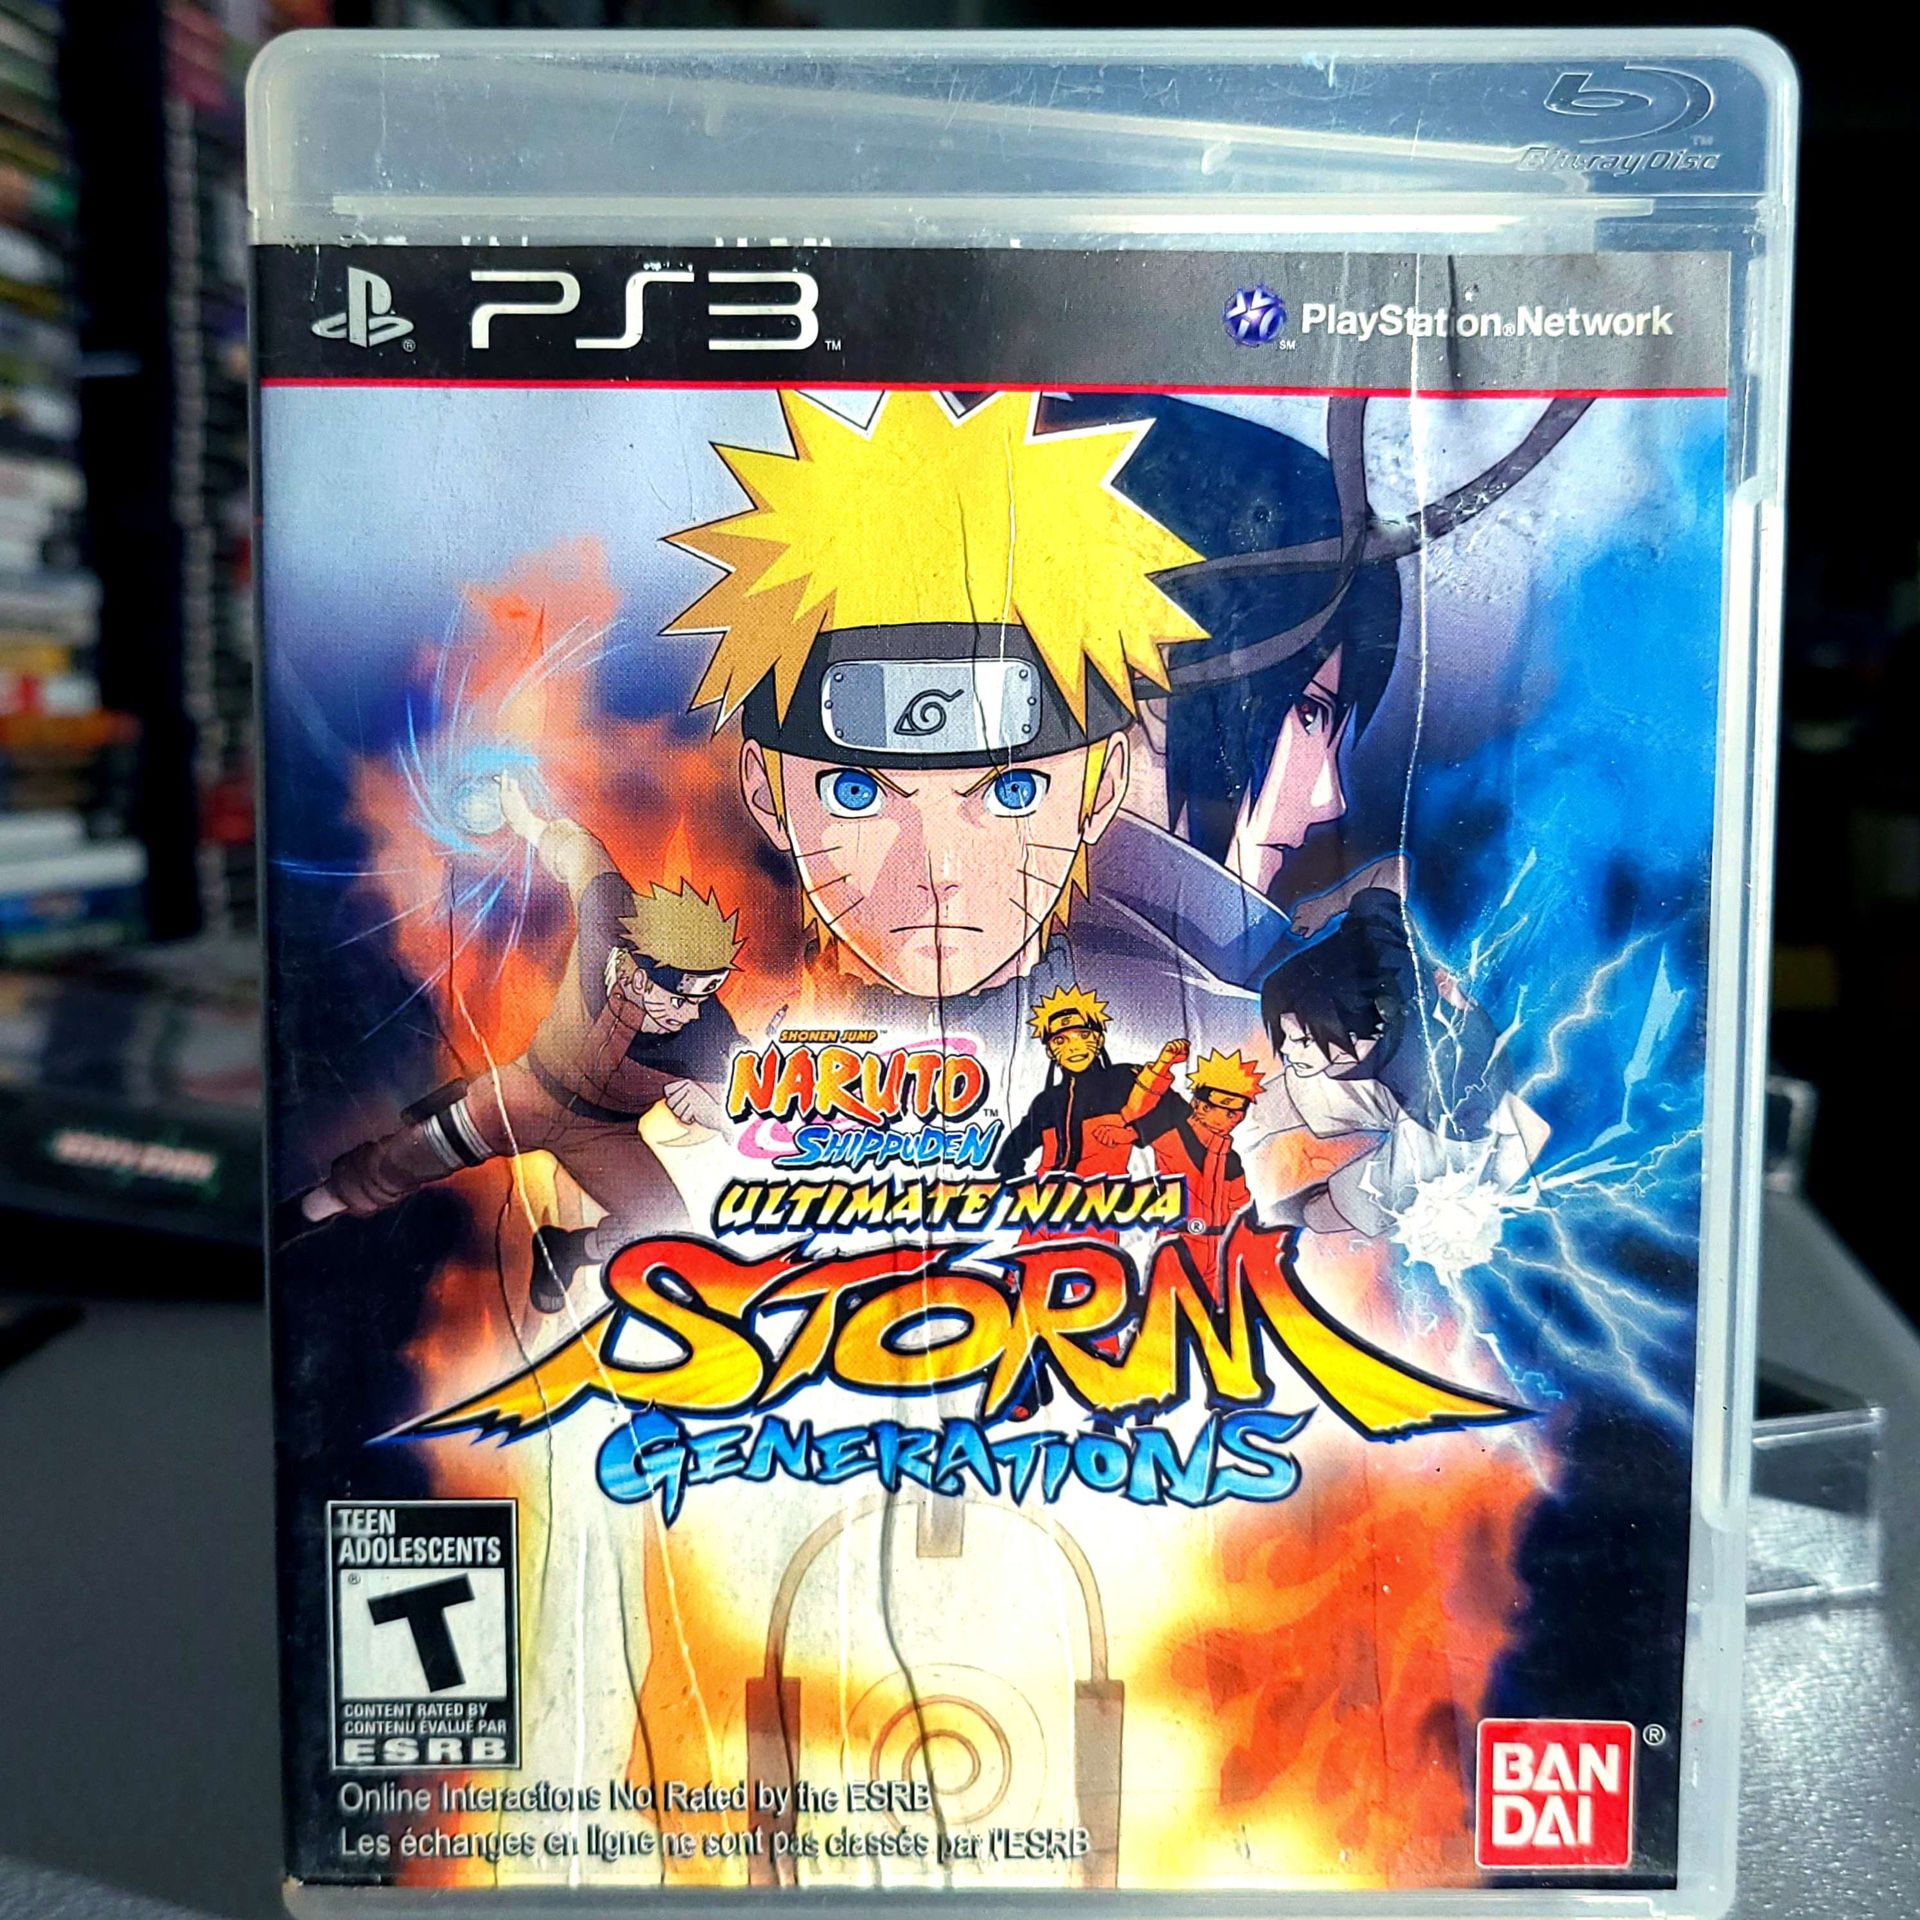 Naruto Shippuden: Ultimate Ninja Storm Generations (PS3, 2013, Manual Has Wear) *TRADE IN YOUR OLD GAMES FOR CSH OR CREDIT HERE/WE FIX SYSTEMS*